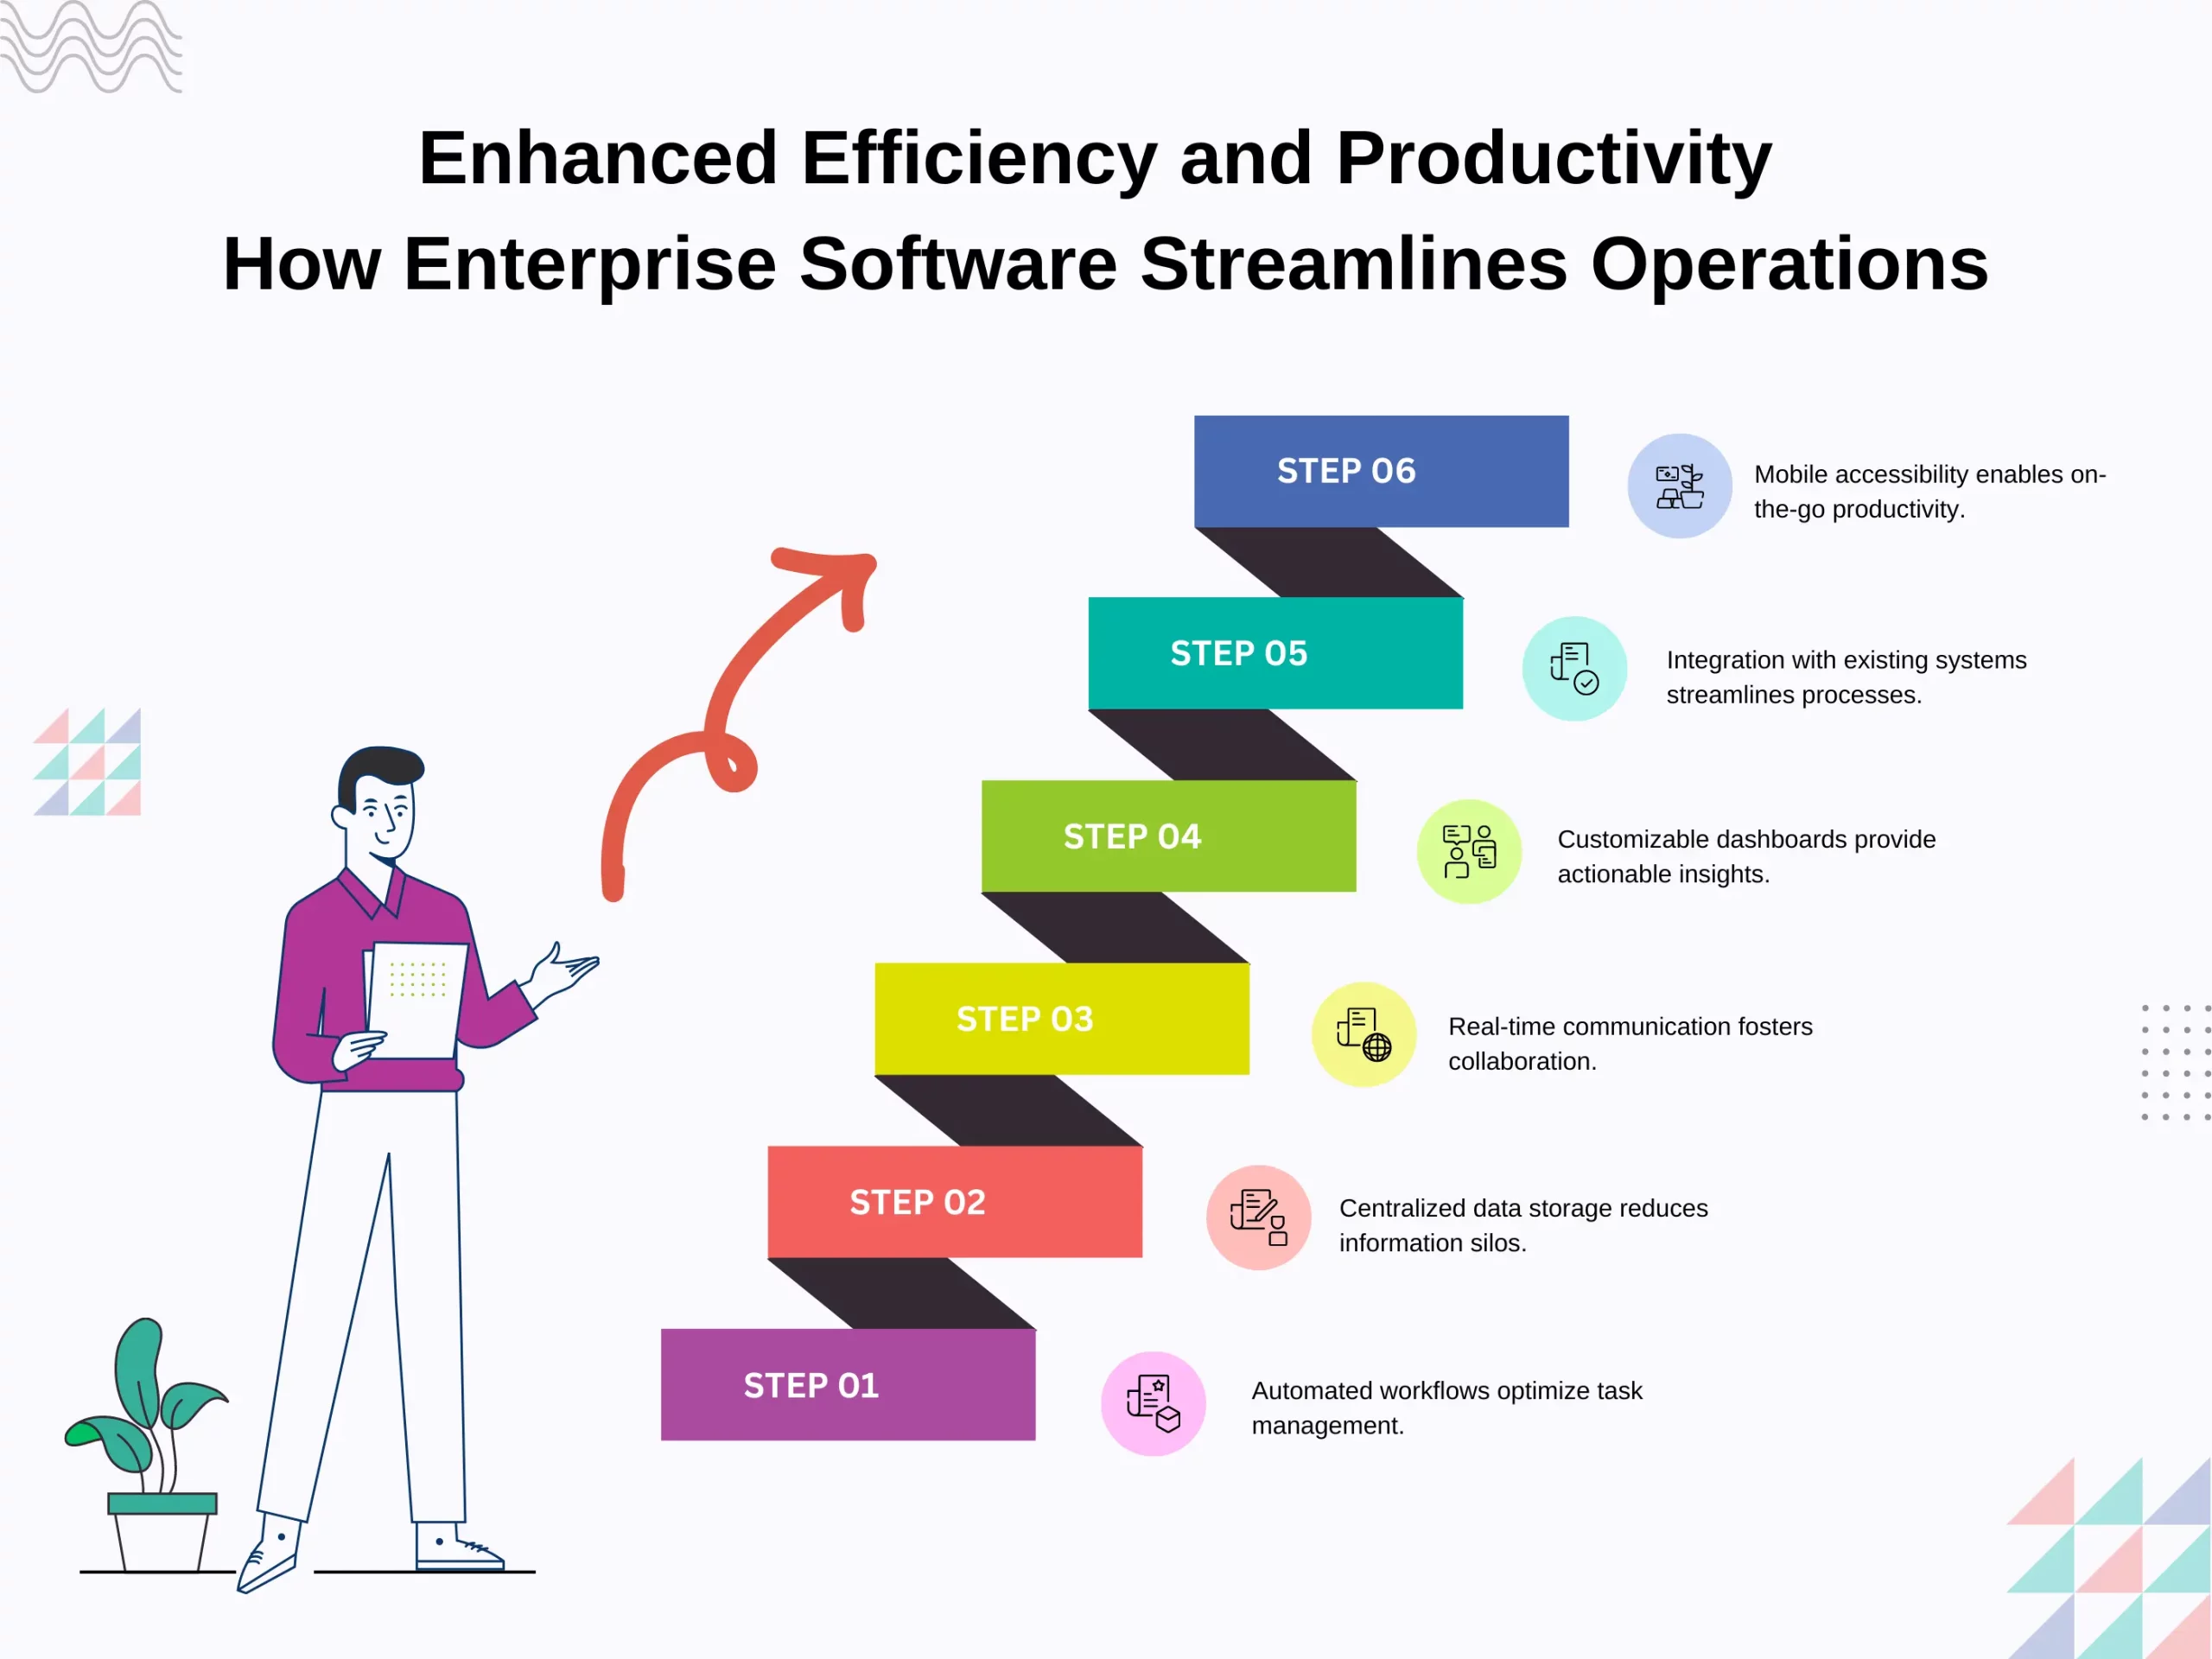 Enhanced Efficiency and Productivity How Enterprise Software Streamlines Operations